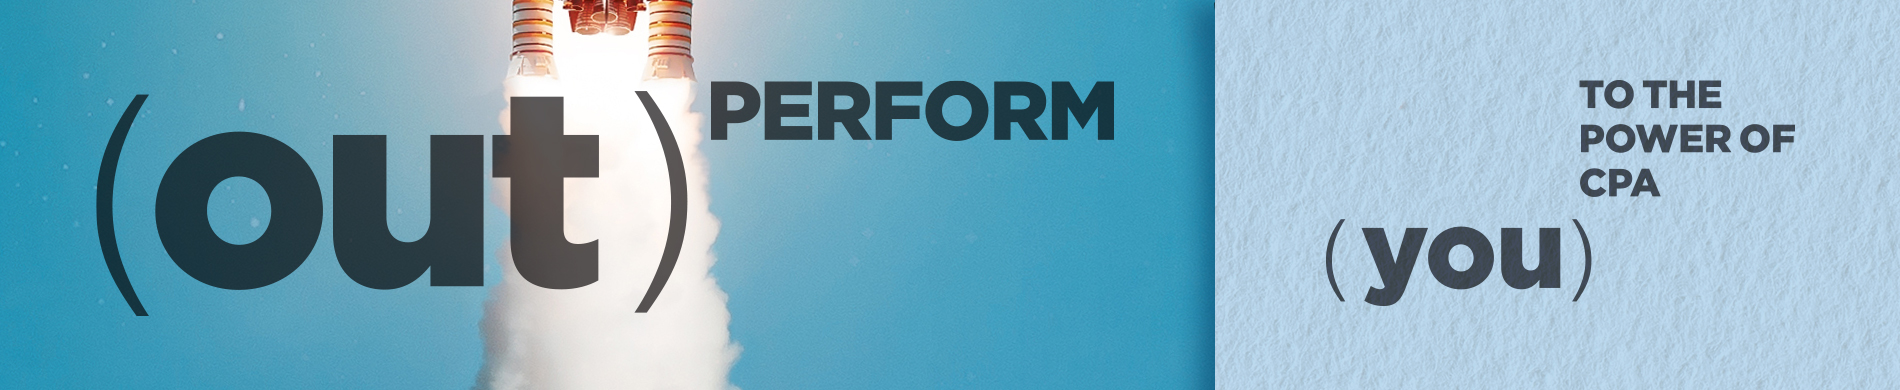 (Out) Perform - (you) To The Power of CPA 